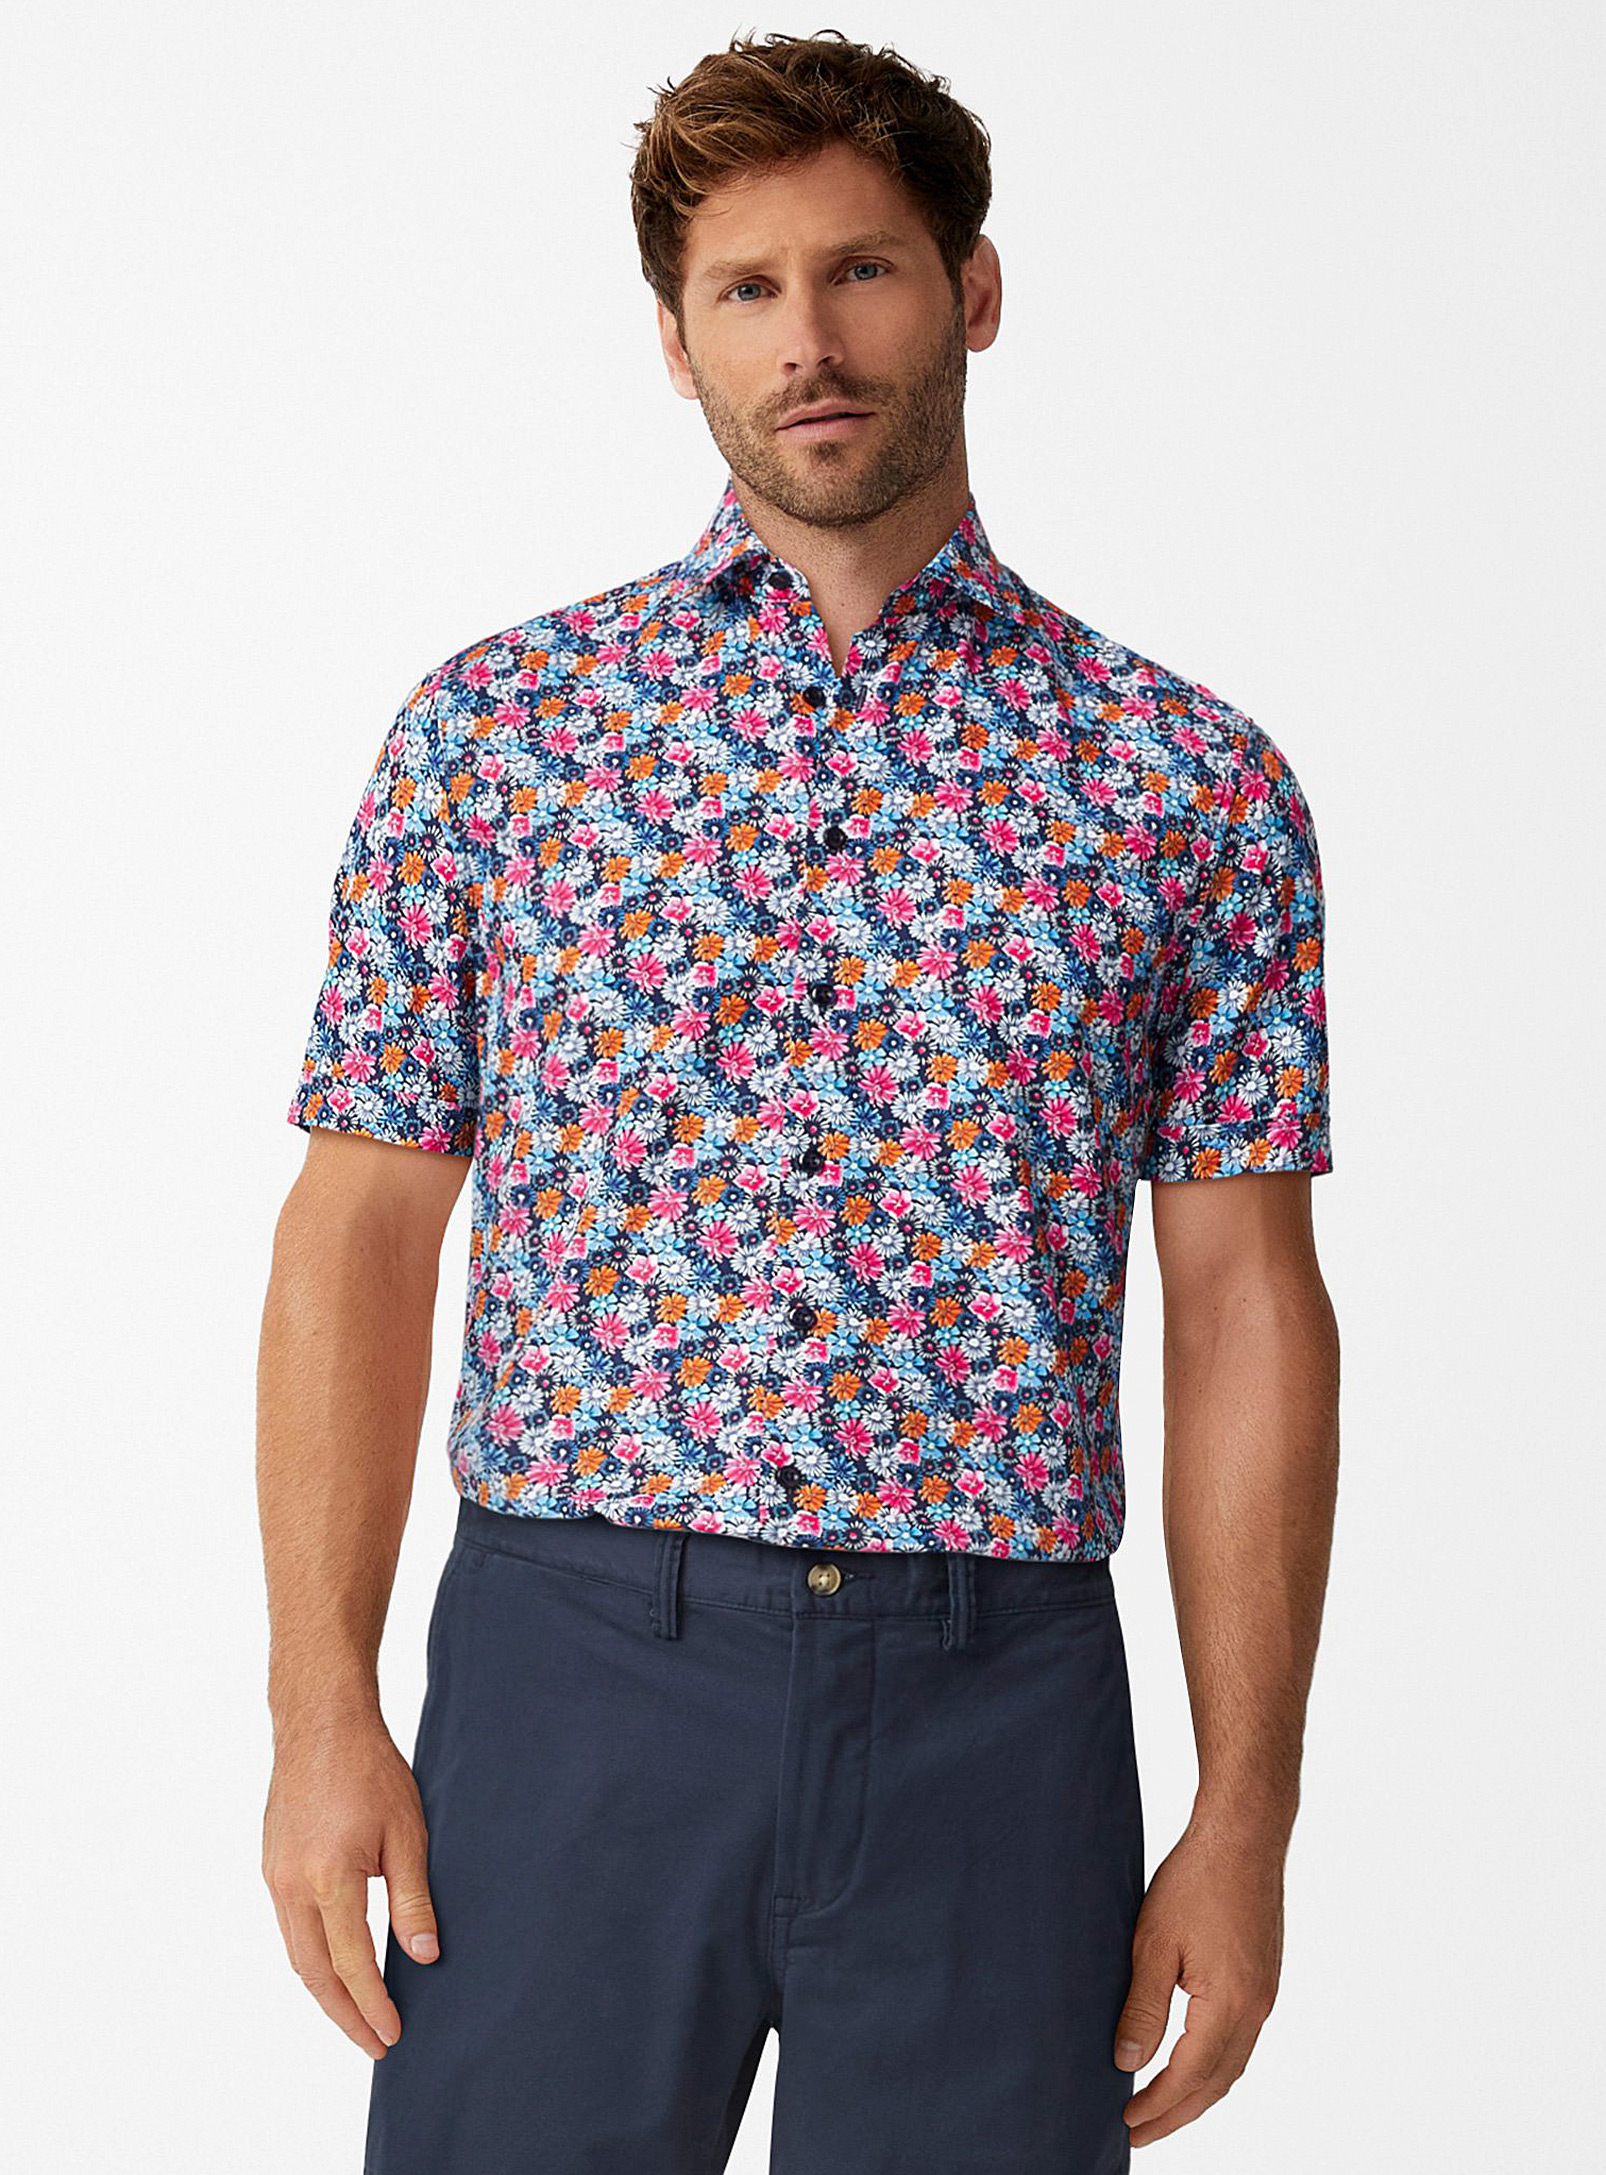 Soul of London - Men's Colourful floral shirt Untucked fit